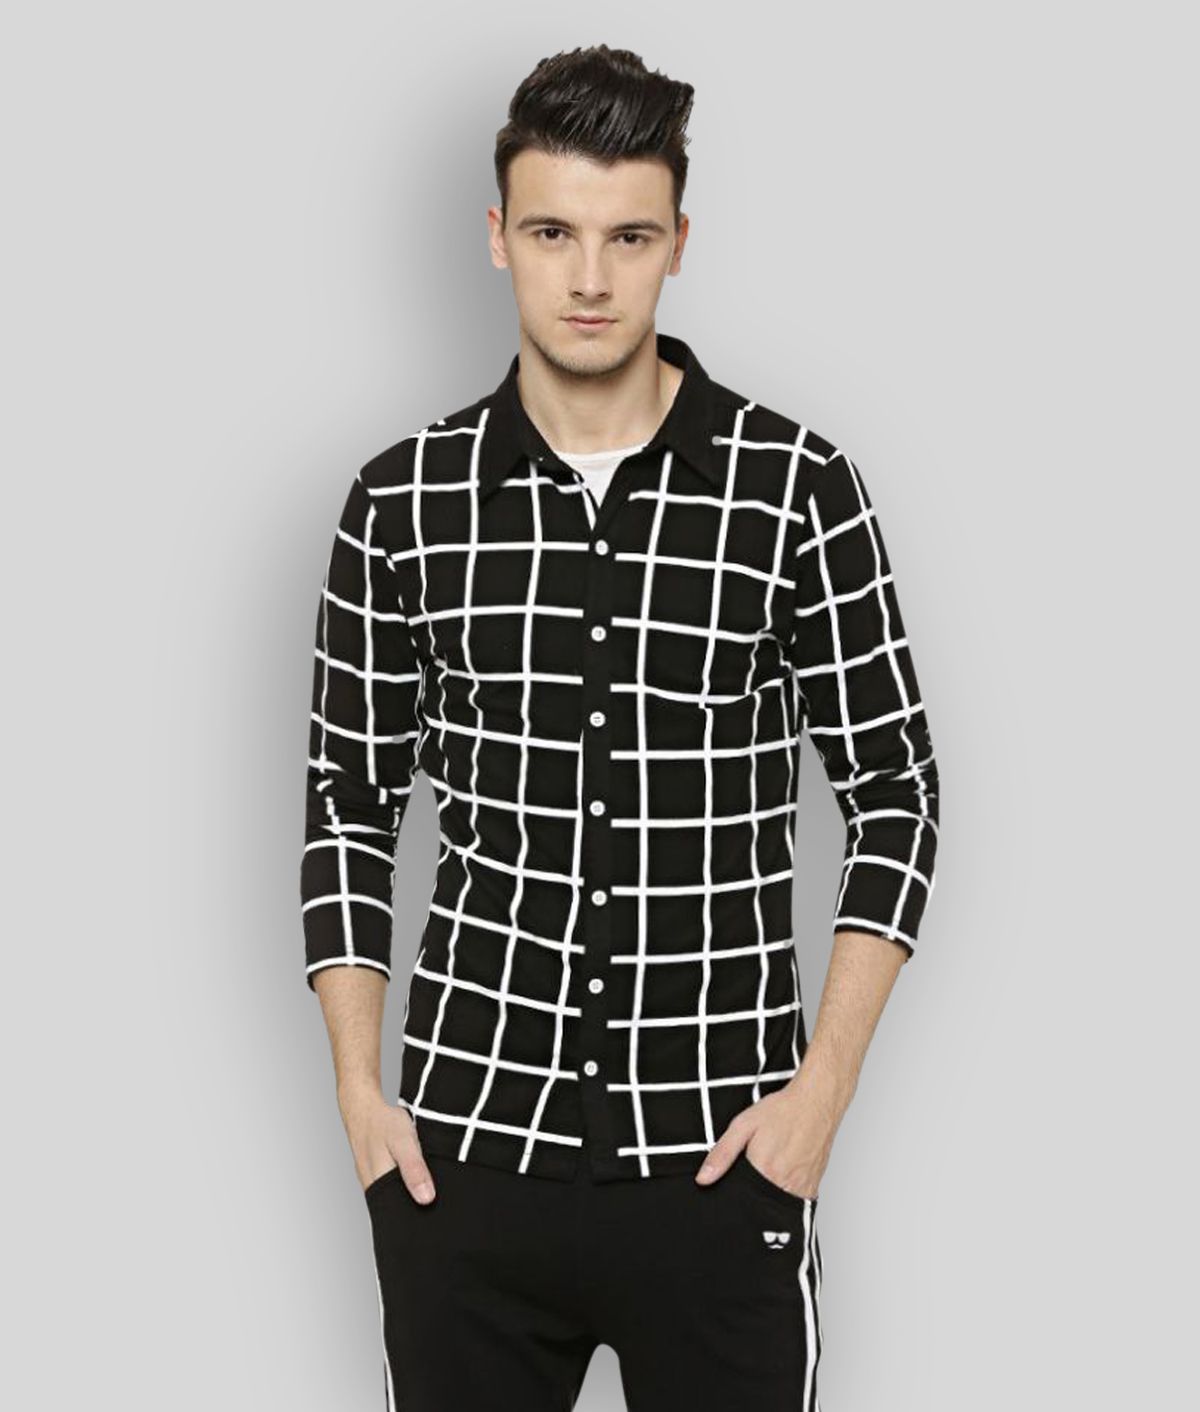     			Campus Sutra - Black Cotton Regular Fit Men's Casual Shirt ( Pack of 1 )